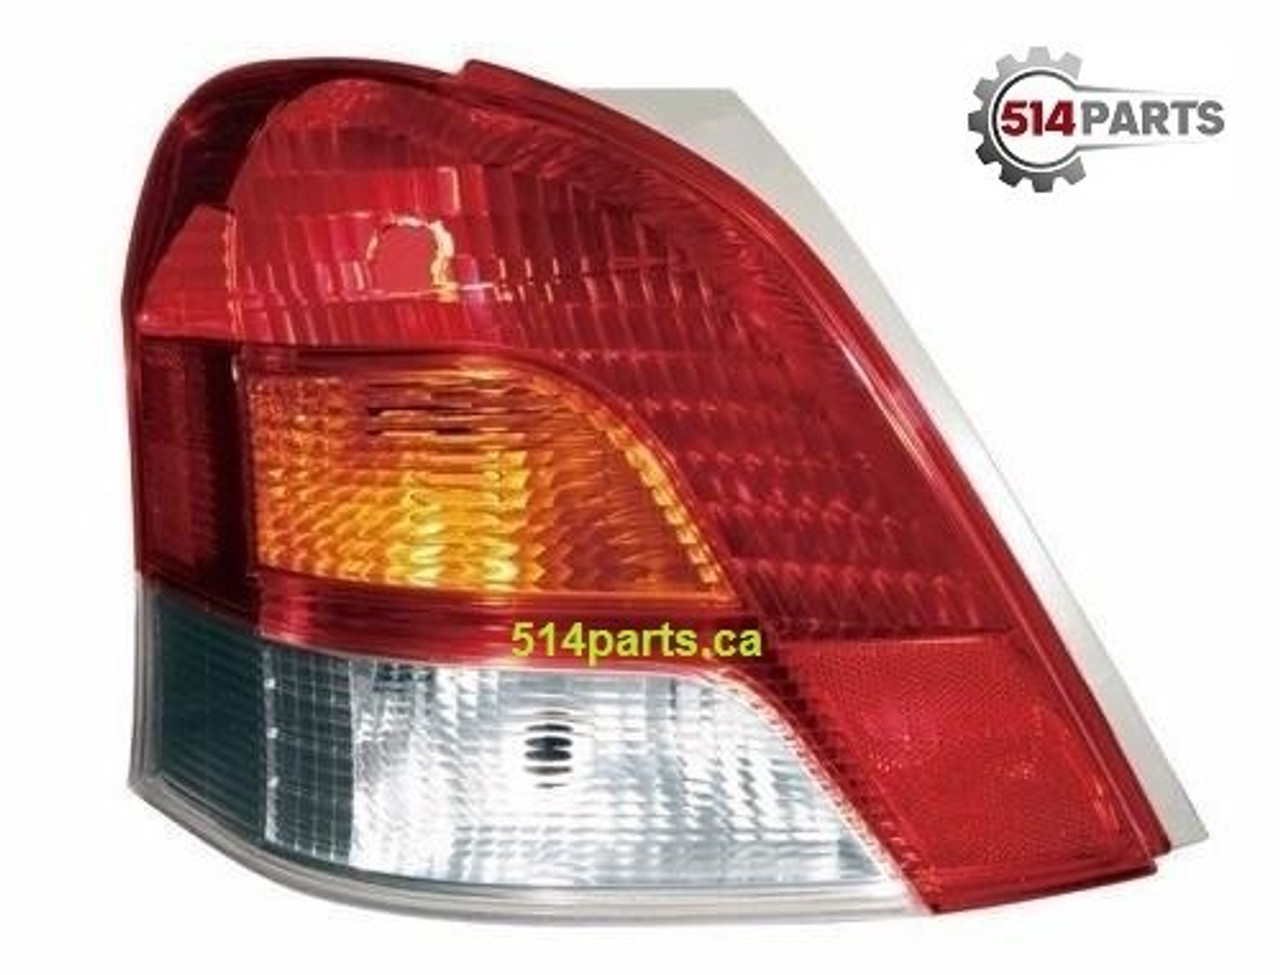 2009 - 2011 TOYOTA YARIS HATCHBACK TAIL LIGHTS - PHARES ARRIERE